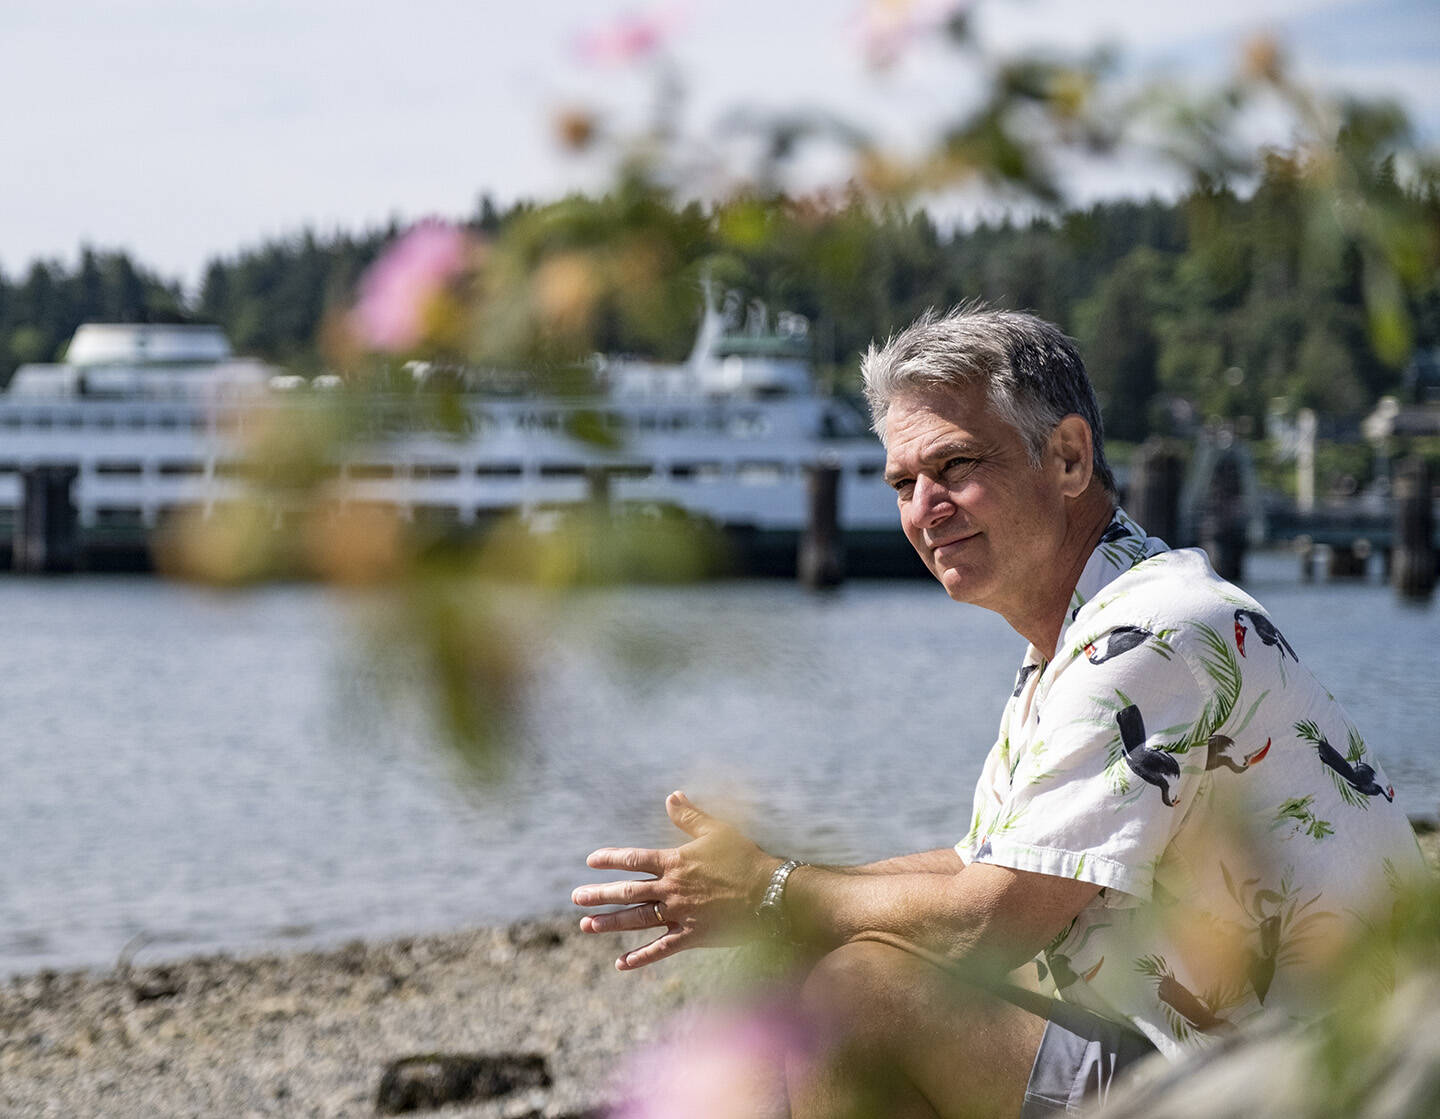 Greg Sugden, in his Hawaiian shirt, relaxes on a sandy beach on Bainbridge Island, with one of the state ferries in the background. Damon Williams/Kitsap News Group